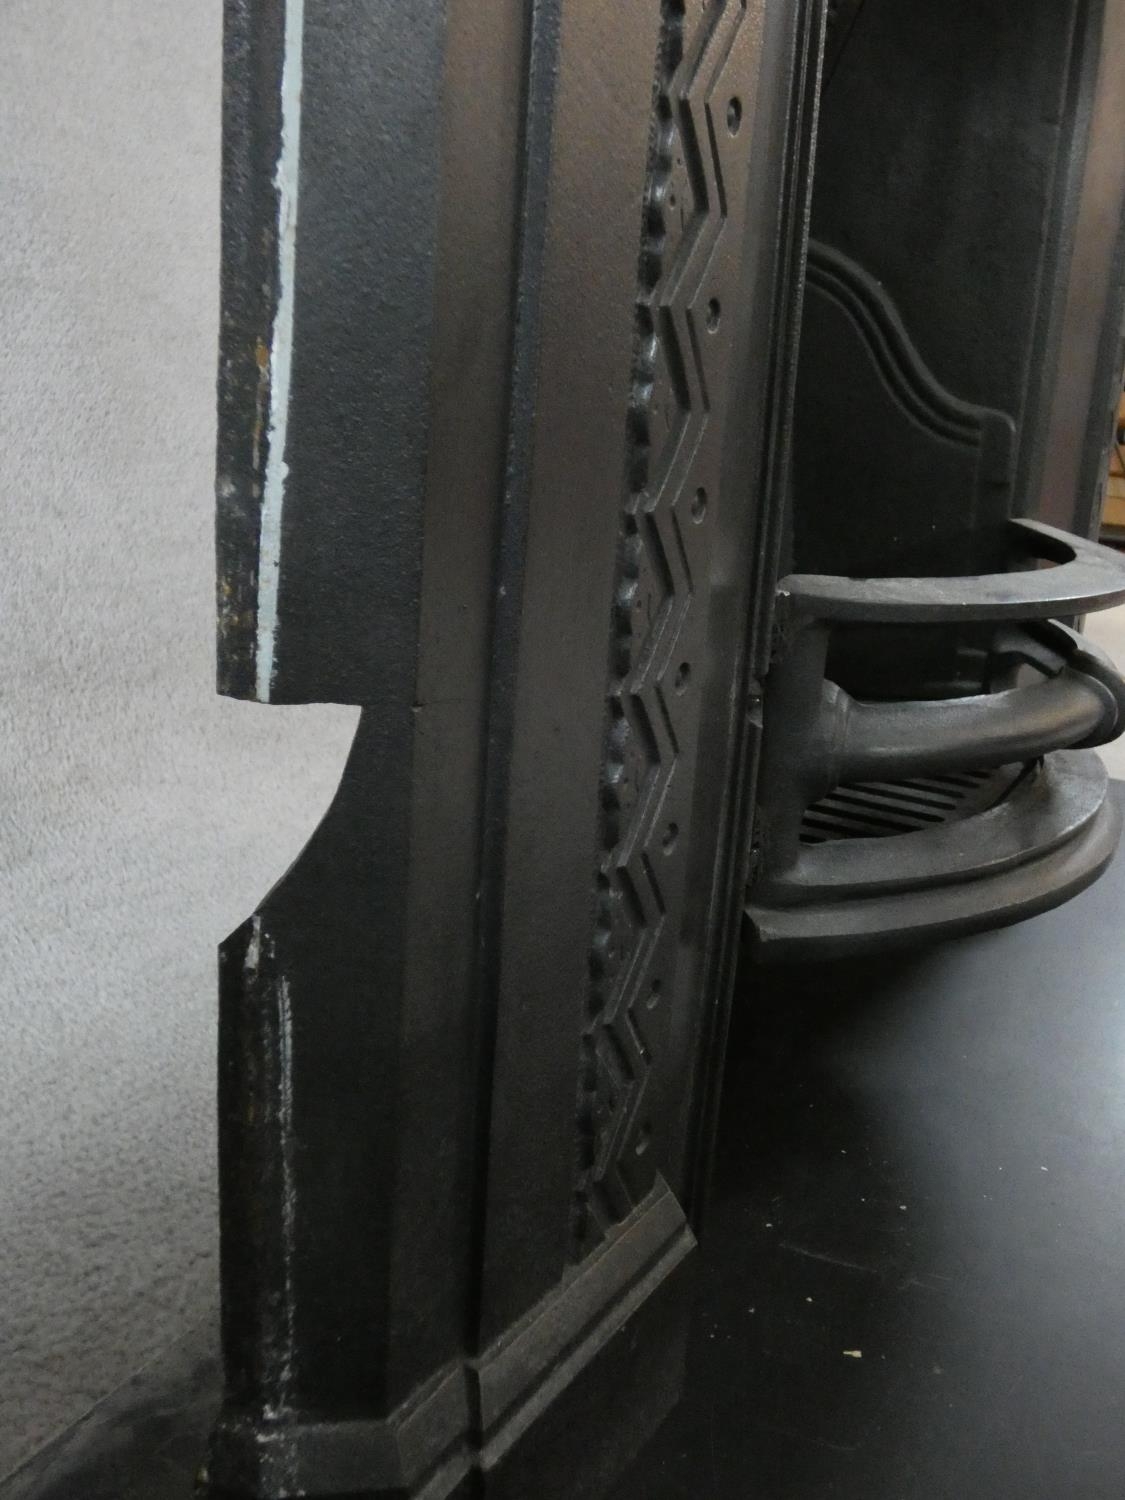 An ornately cast 19th century iron fire surround, mantel shelf and insert with grate on marble - Image 7 of 13